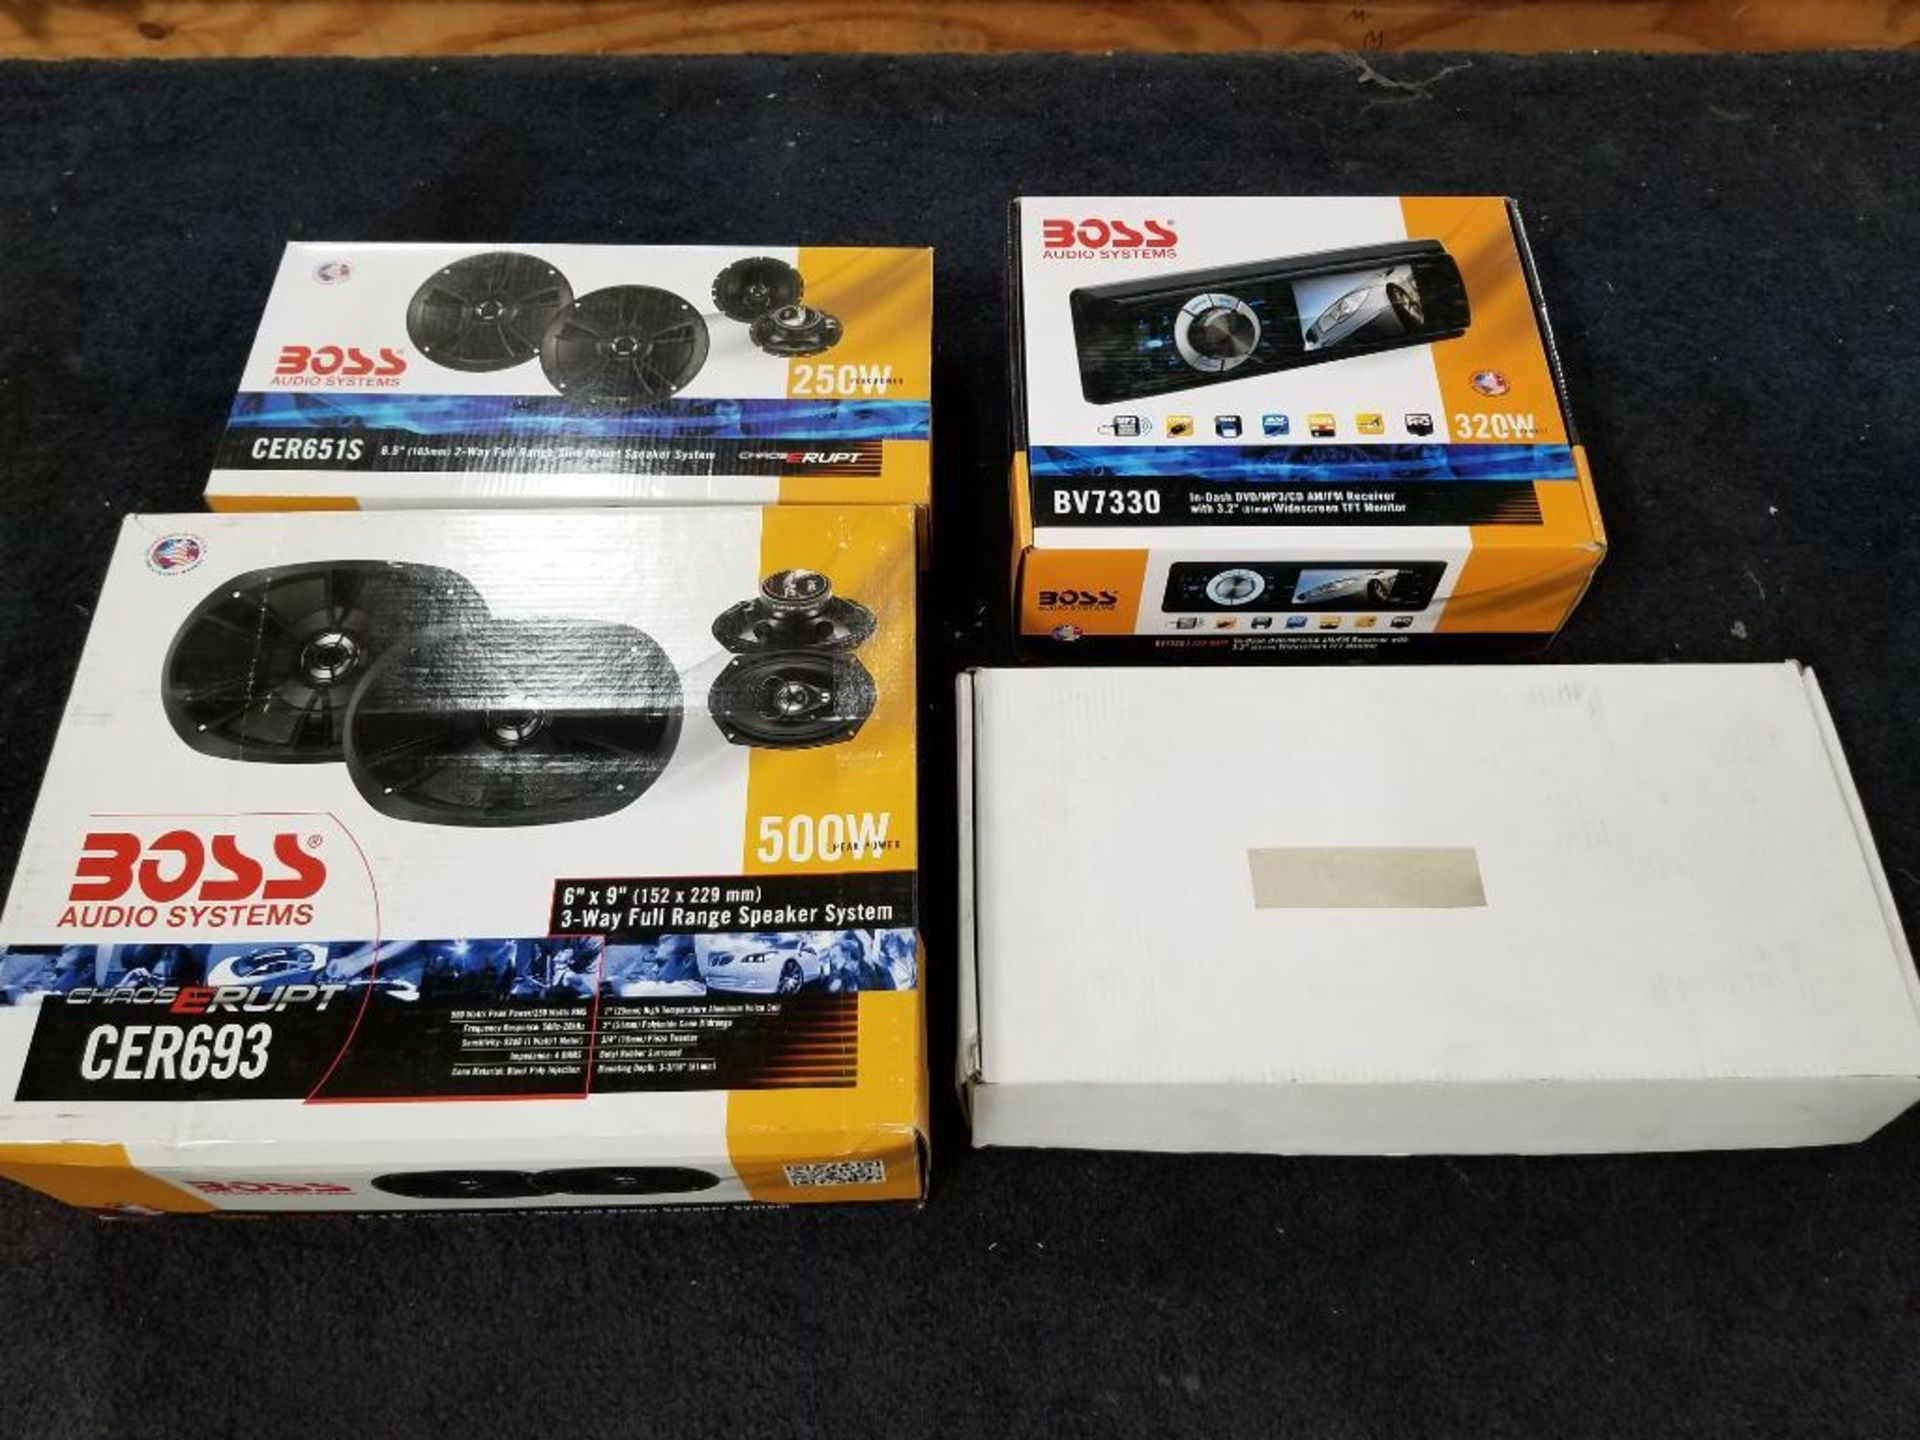 Qty 4 - Assorted Boss car stereo units. New in box.